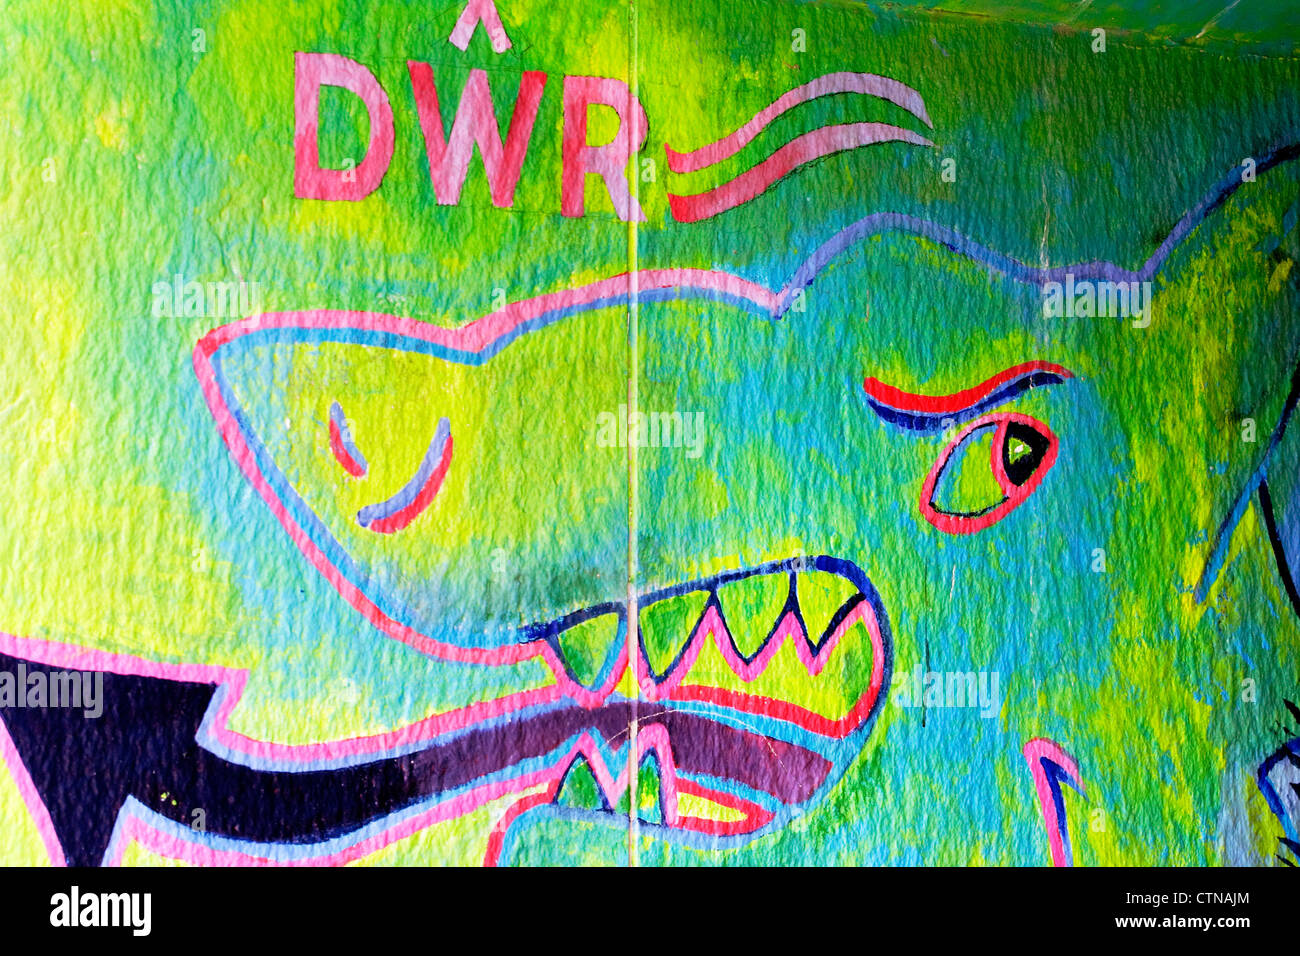 Wall graffiti depicting a Welsh water Dragon with the welsh word for water (Dwr) written above it. Stock Photo